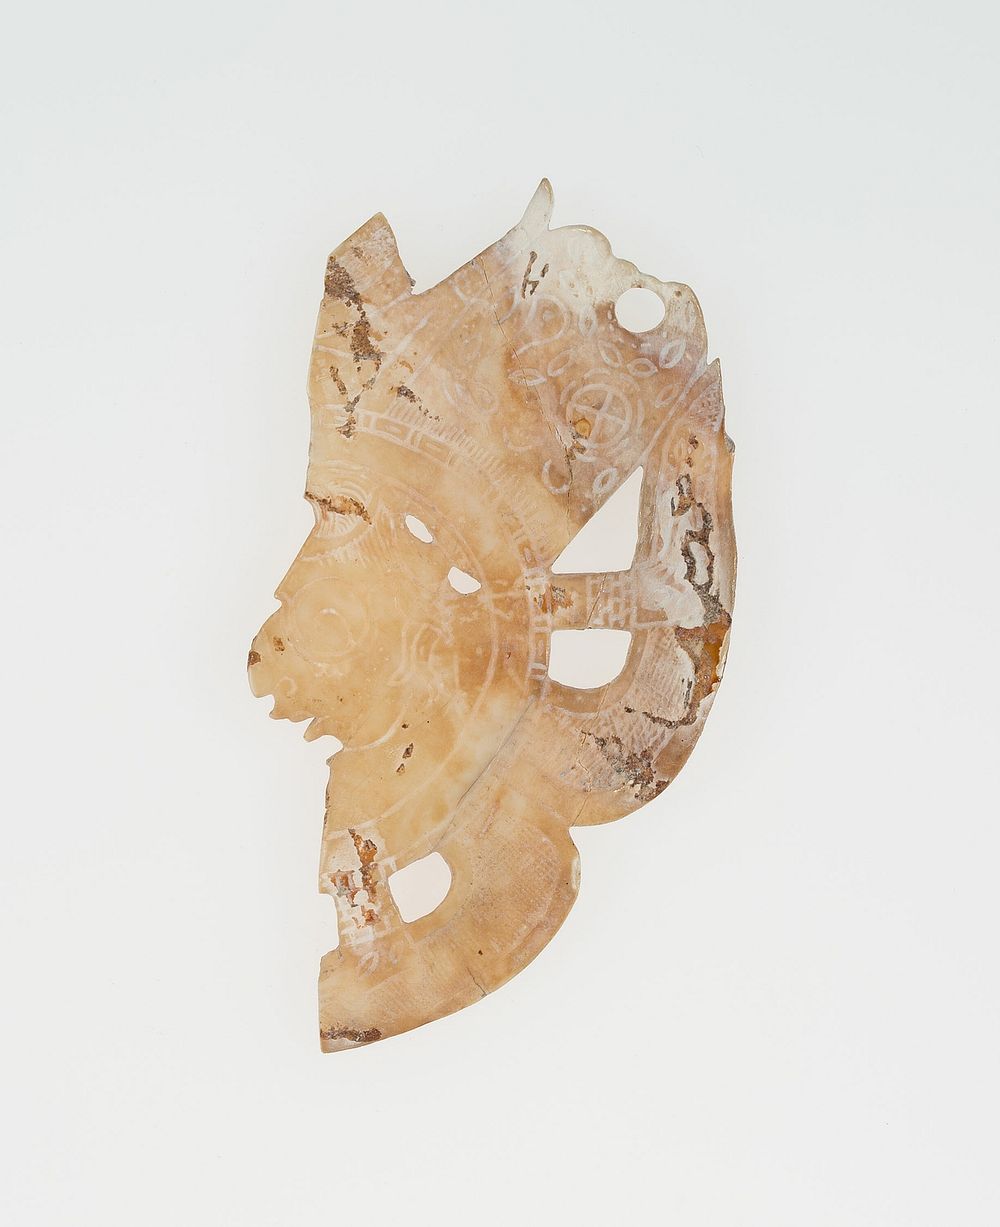 Carved Shell Depicting the Profile Face of Diety (Broken) by Maya